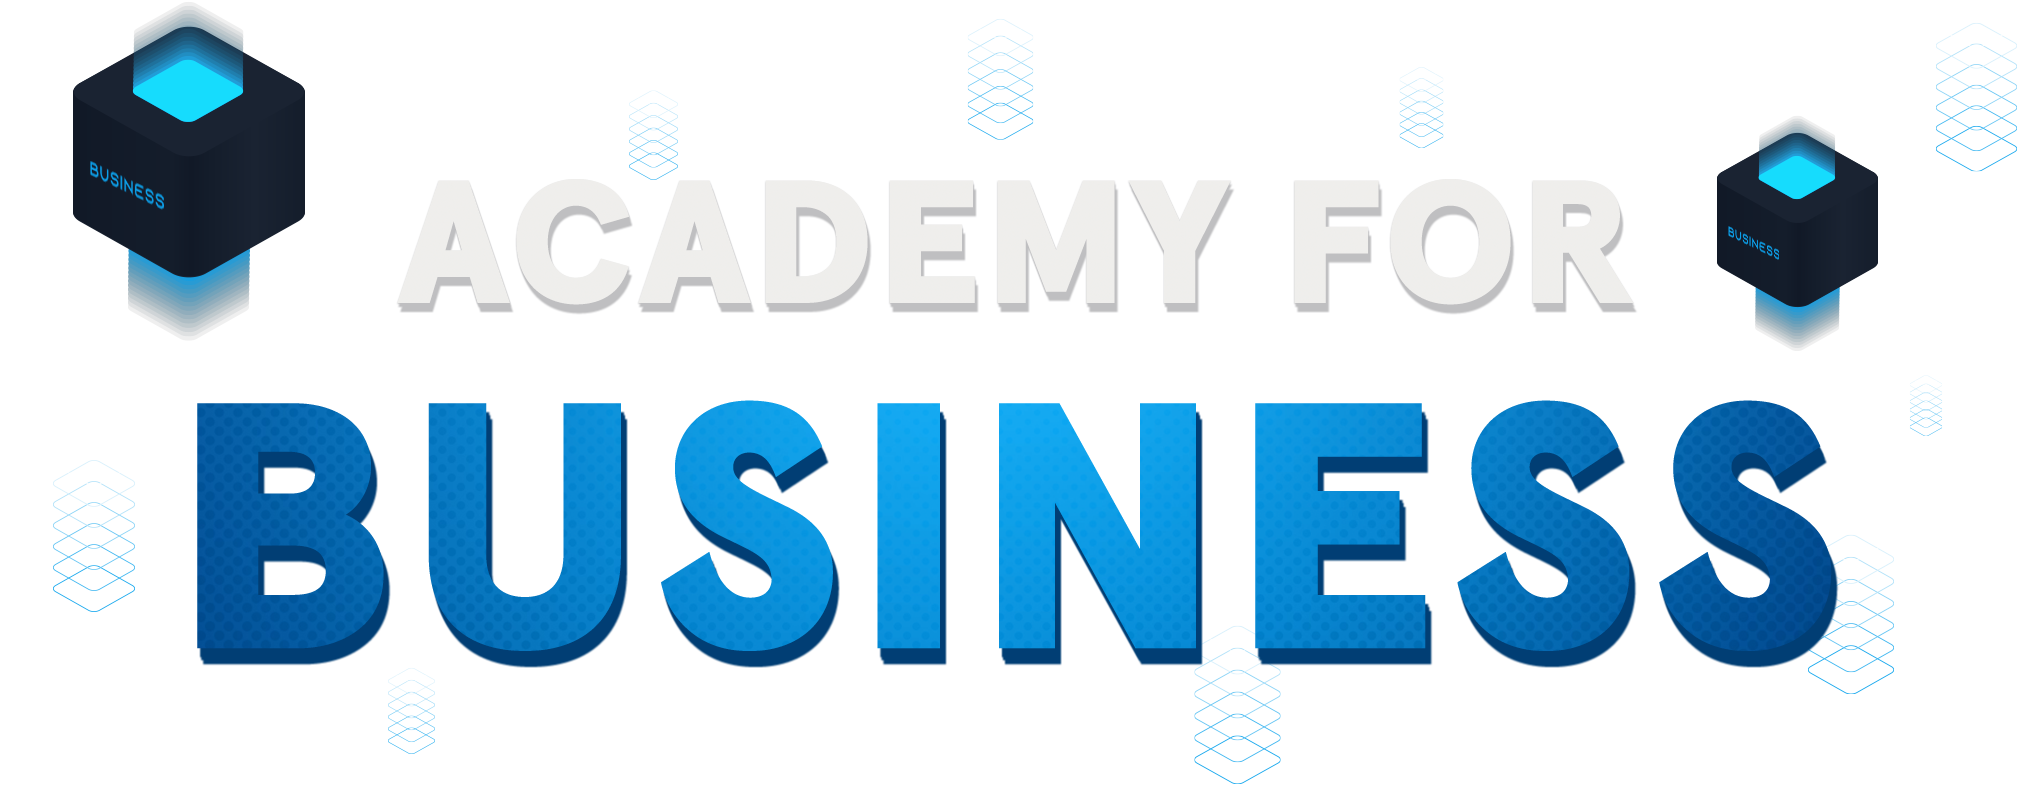 HTB Academy for Business is now available!